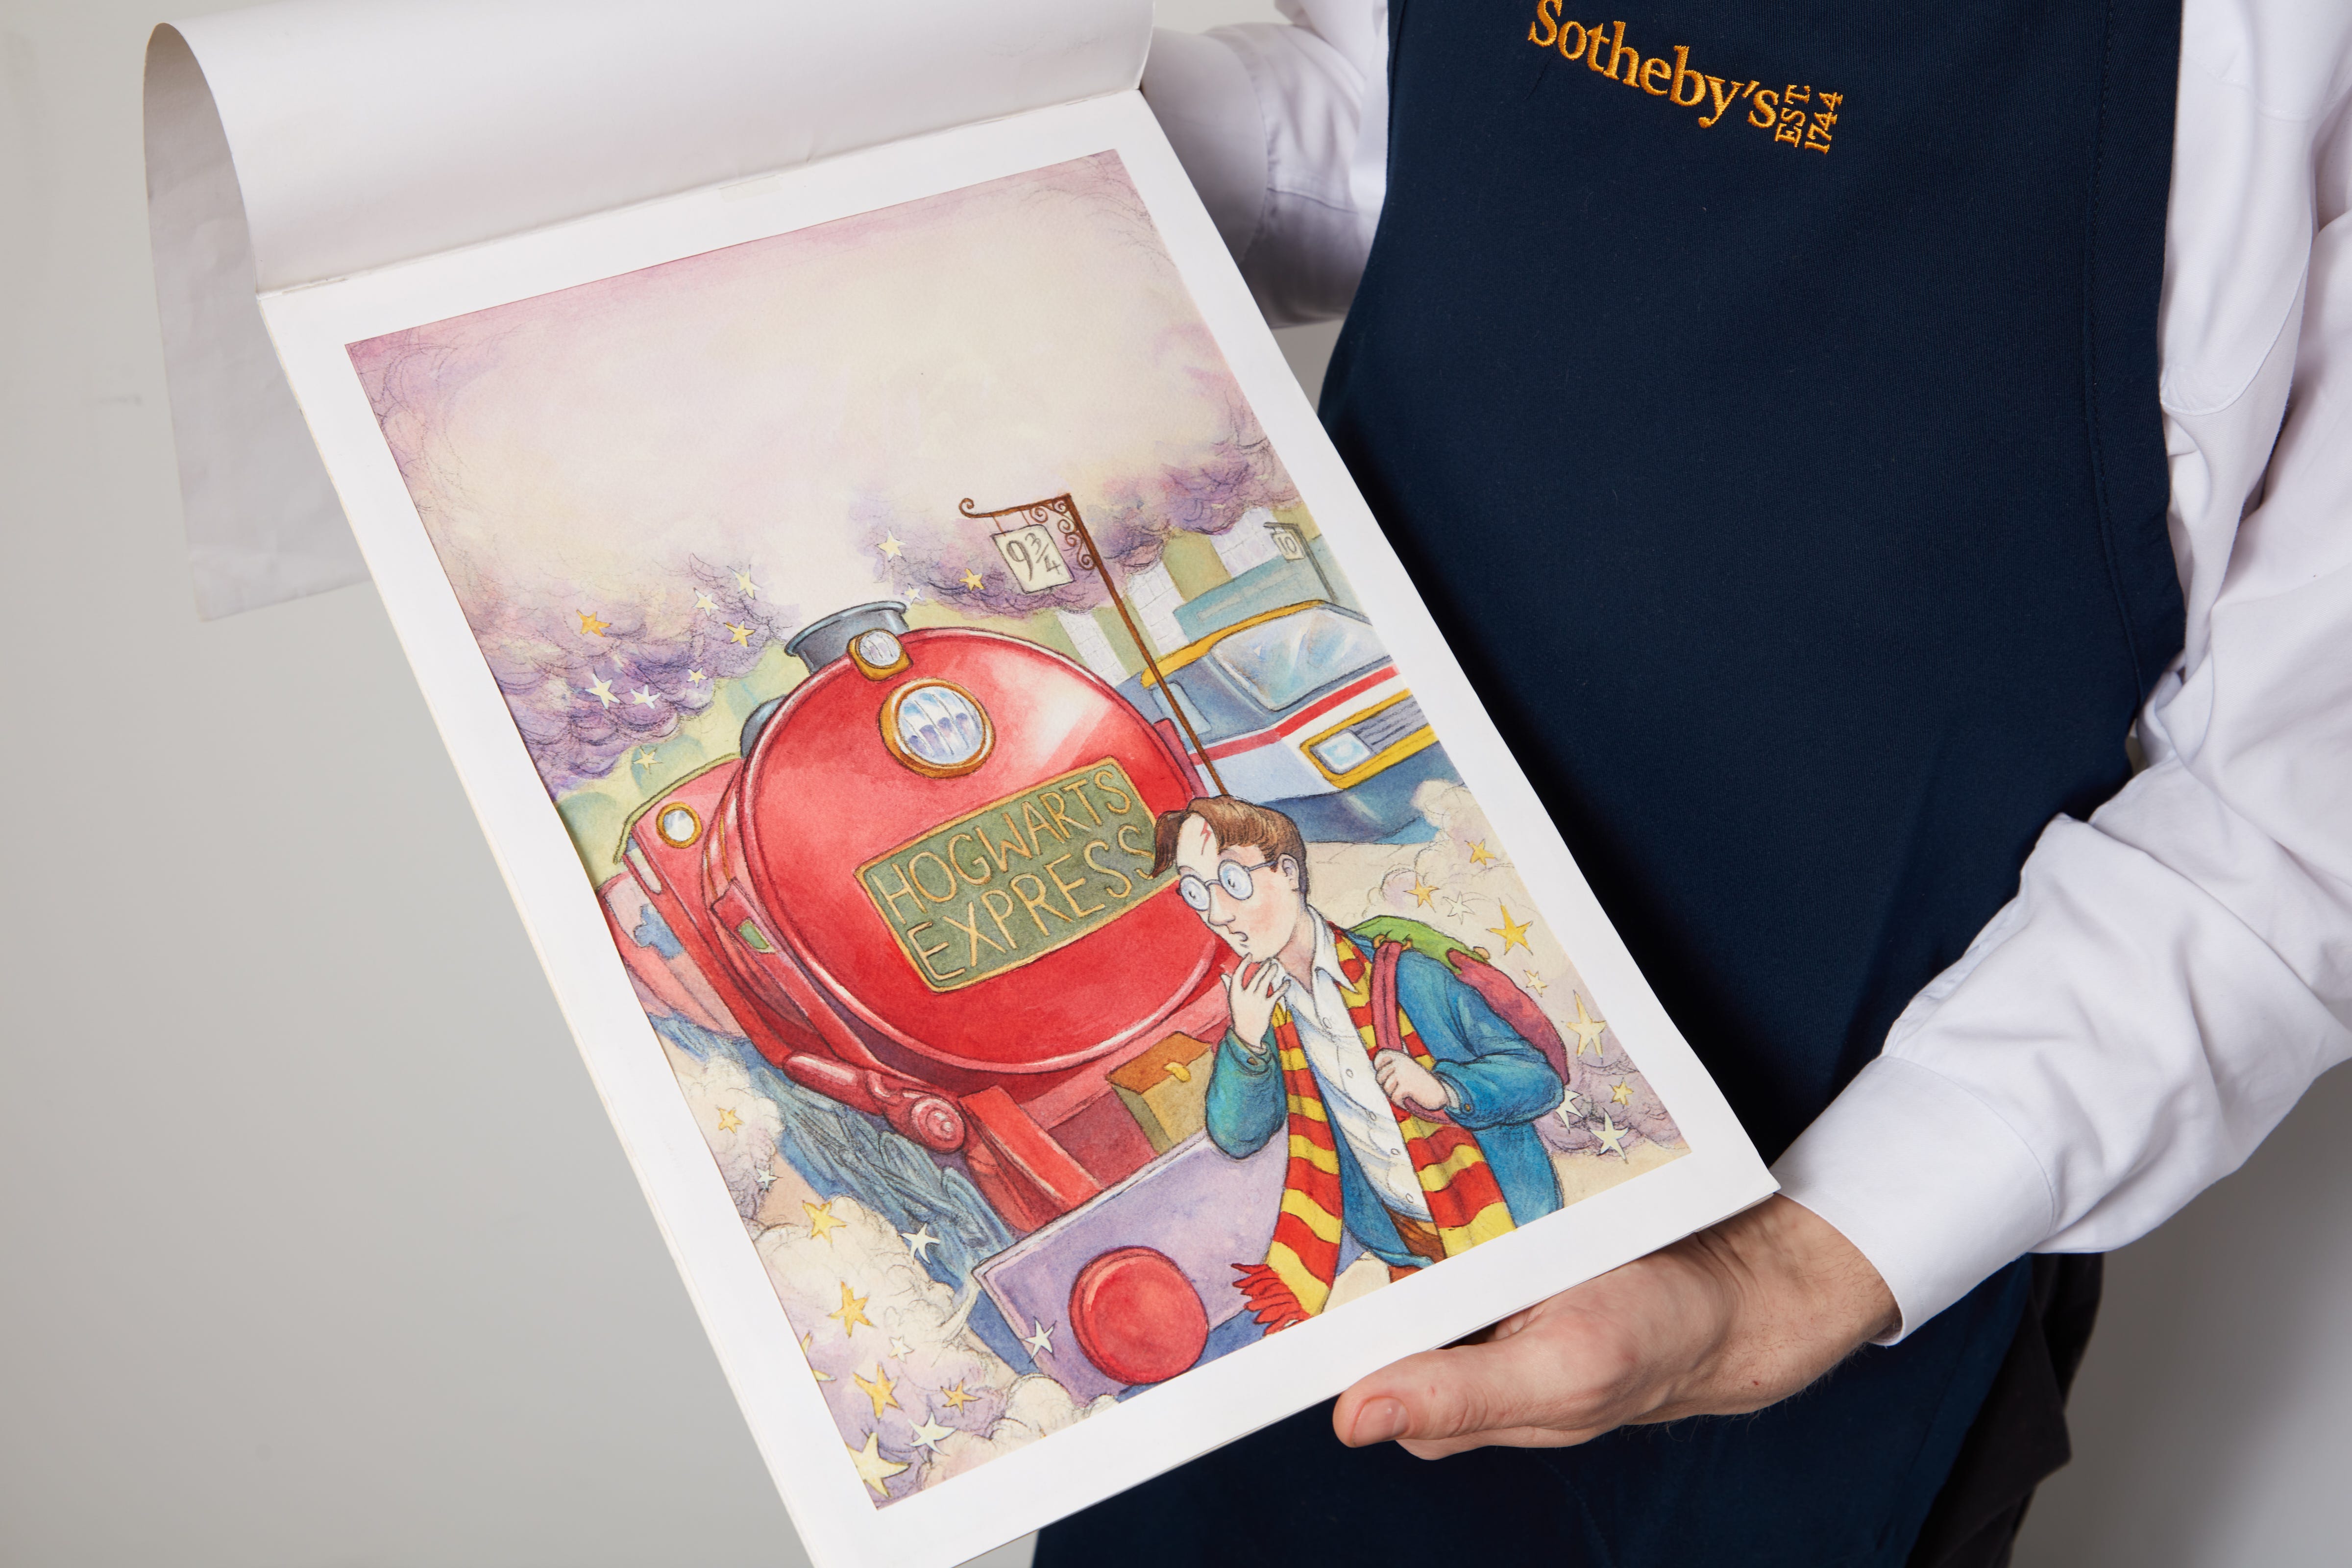 harry potter, jk rowling, sotheby's, harry potter and the philosopher’s stone artwork sells for record £1.5m